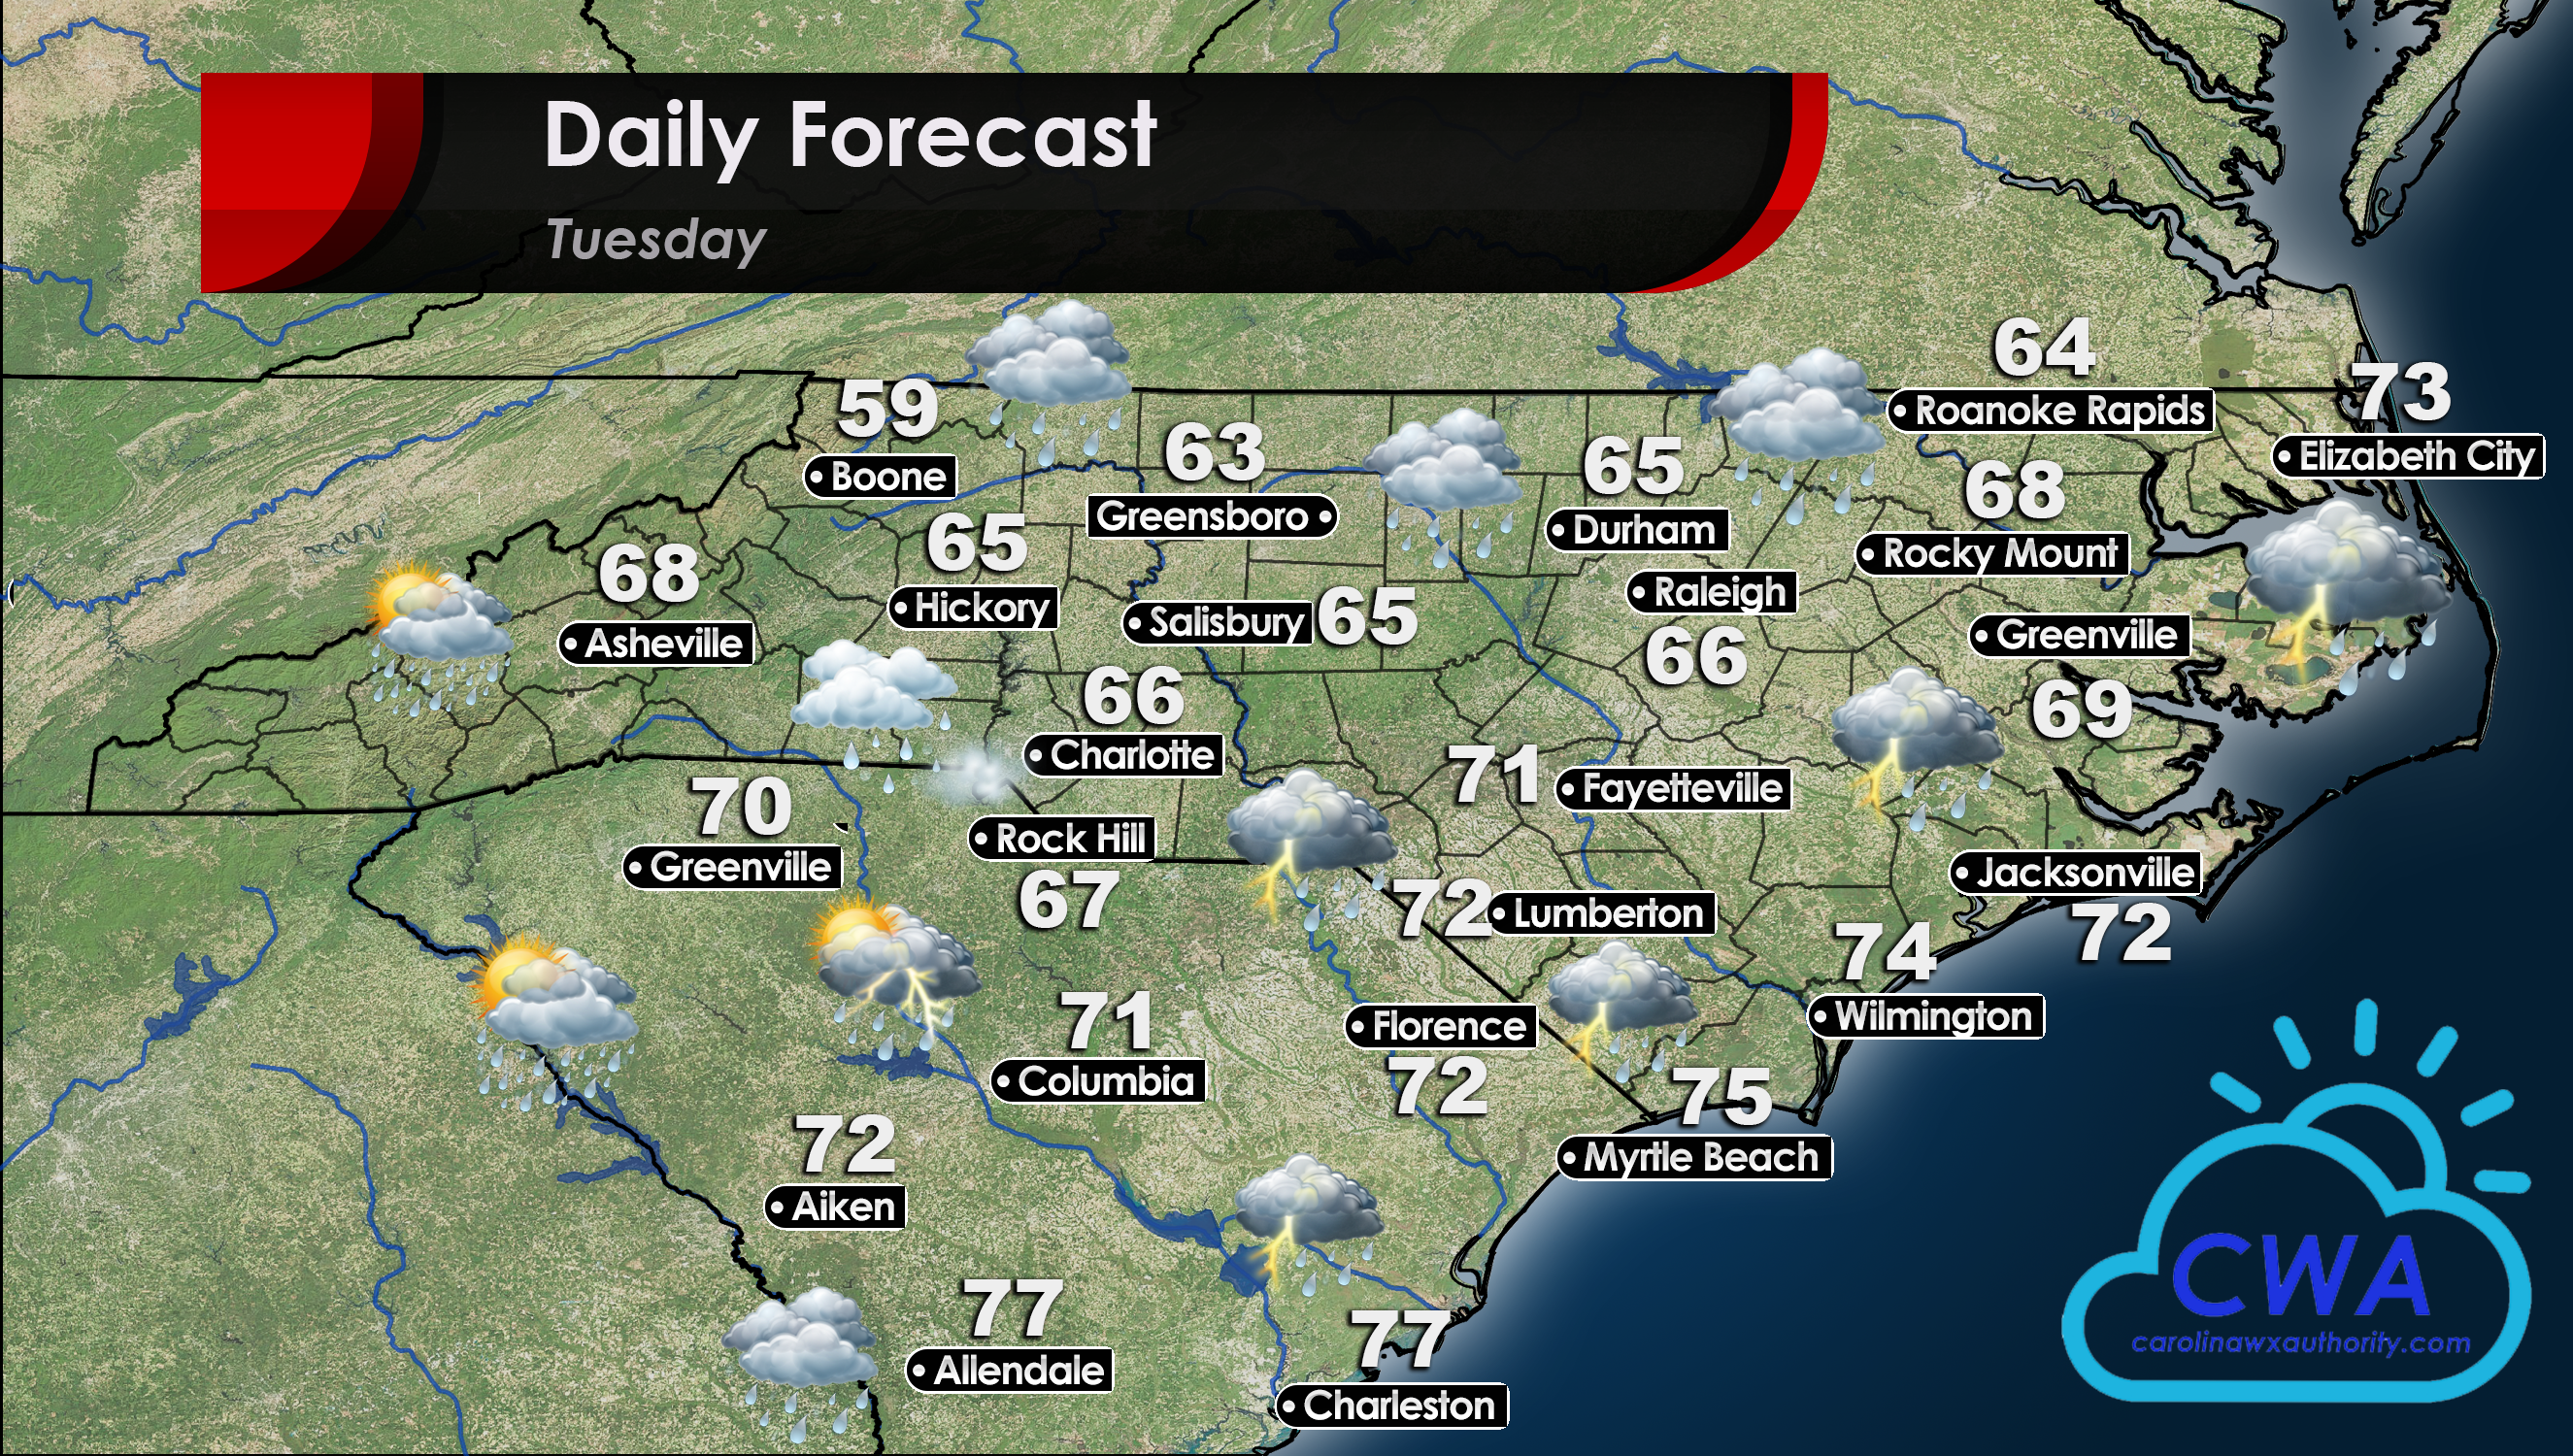 Weather forecast and project high temperatures for Tuesday June 16 in the Carolinas